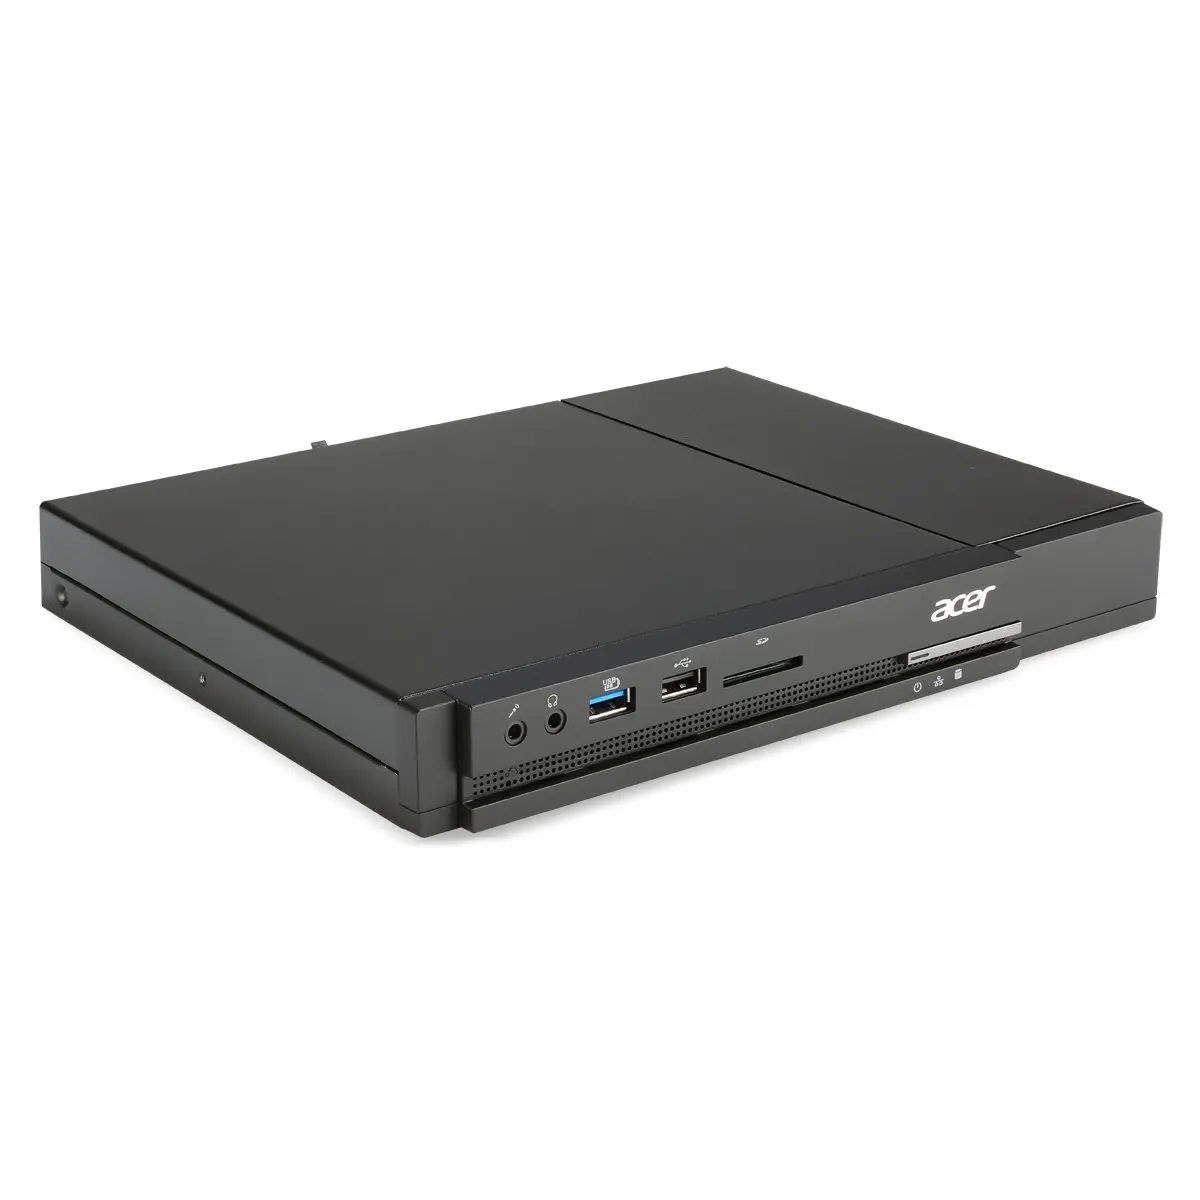 Buy Acer Veriton N4630g Vn4630g Ix Nettop Computer Intel Core I5 I5 4570t 2 90 Ghz 4 Gb Ddr3 Sdram 500 Gb Hdd W In Cheap Price On Alibaba Com